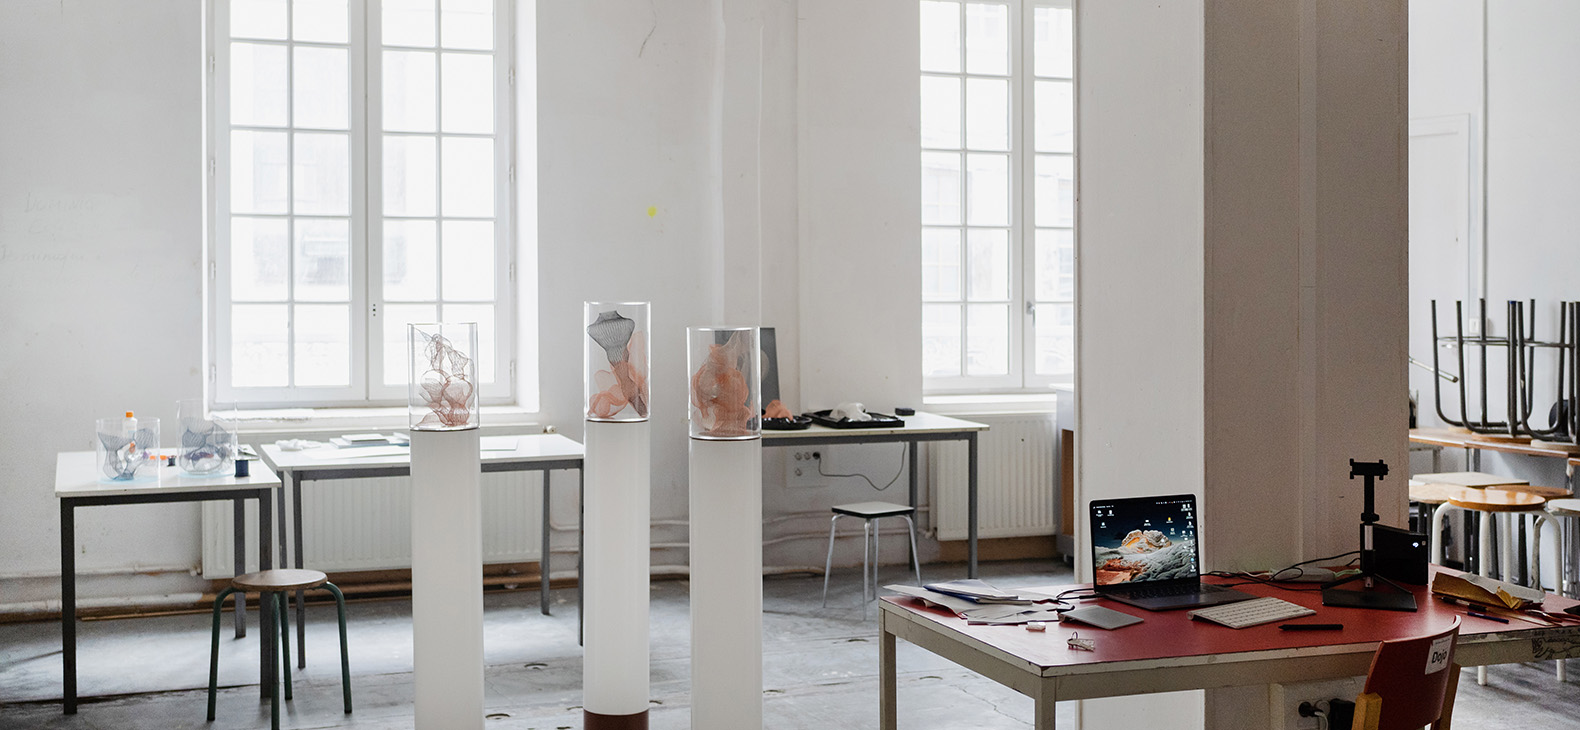 Residency Program Schafhof / District of Upper Bavaria: Focus /> Orléans; Image: View of one of the studios on site; works by artist Julia Smirnova can be seen in the room.